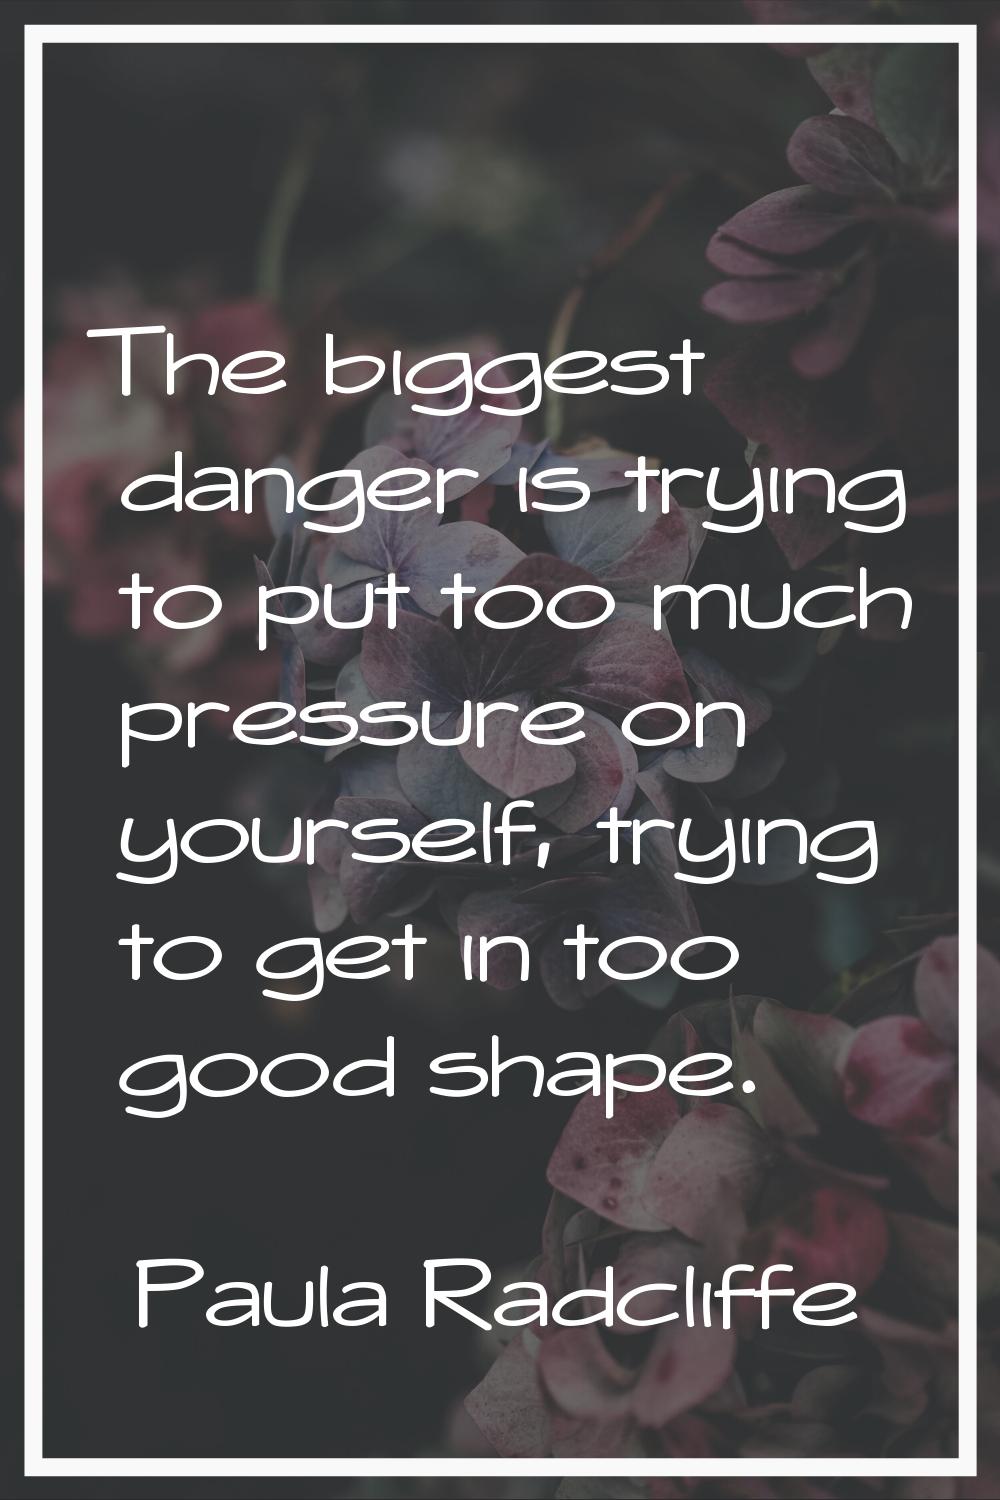 The biggest danger is trying to put too much pressure on yourself, trying to get in too good shape.